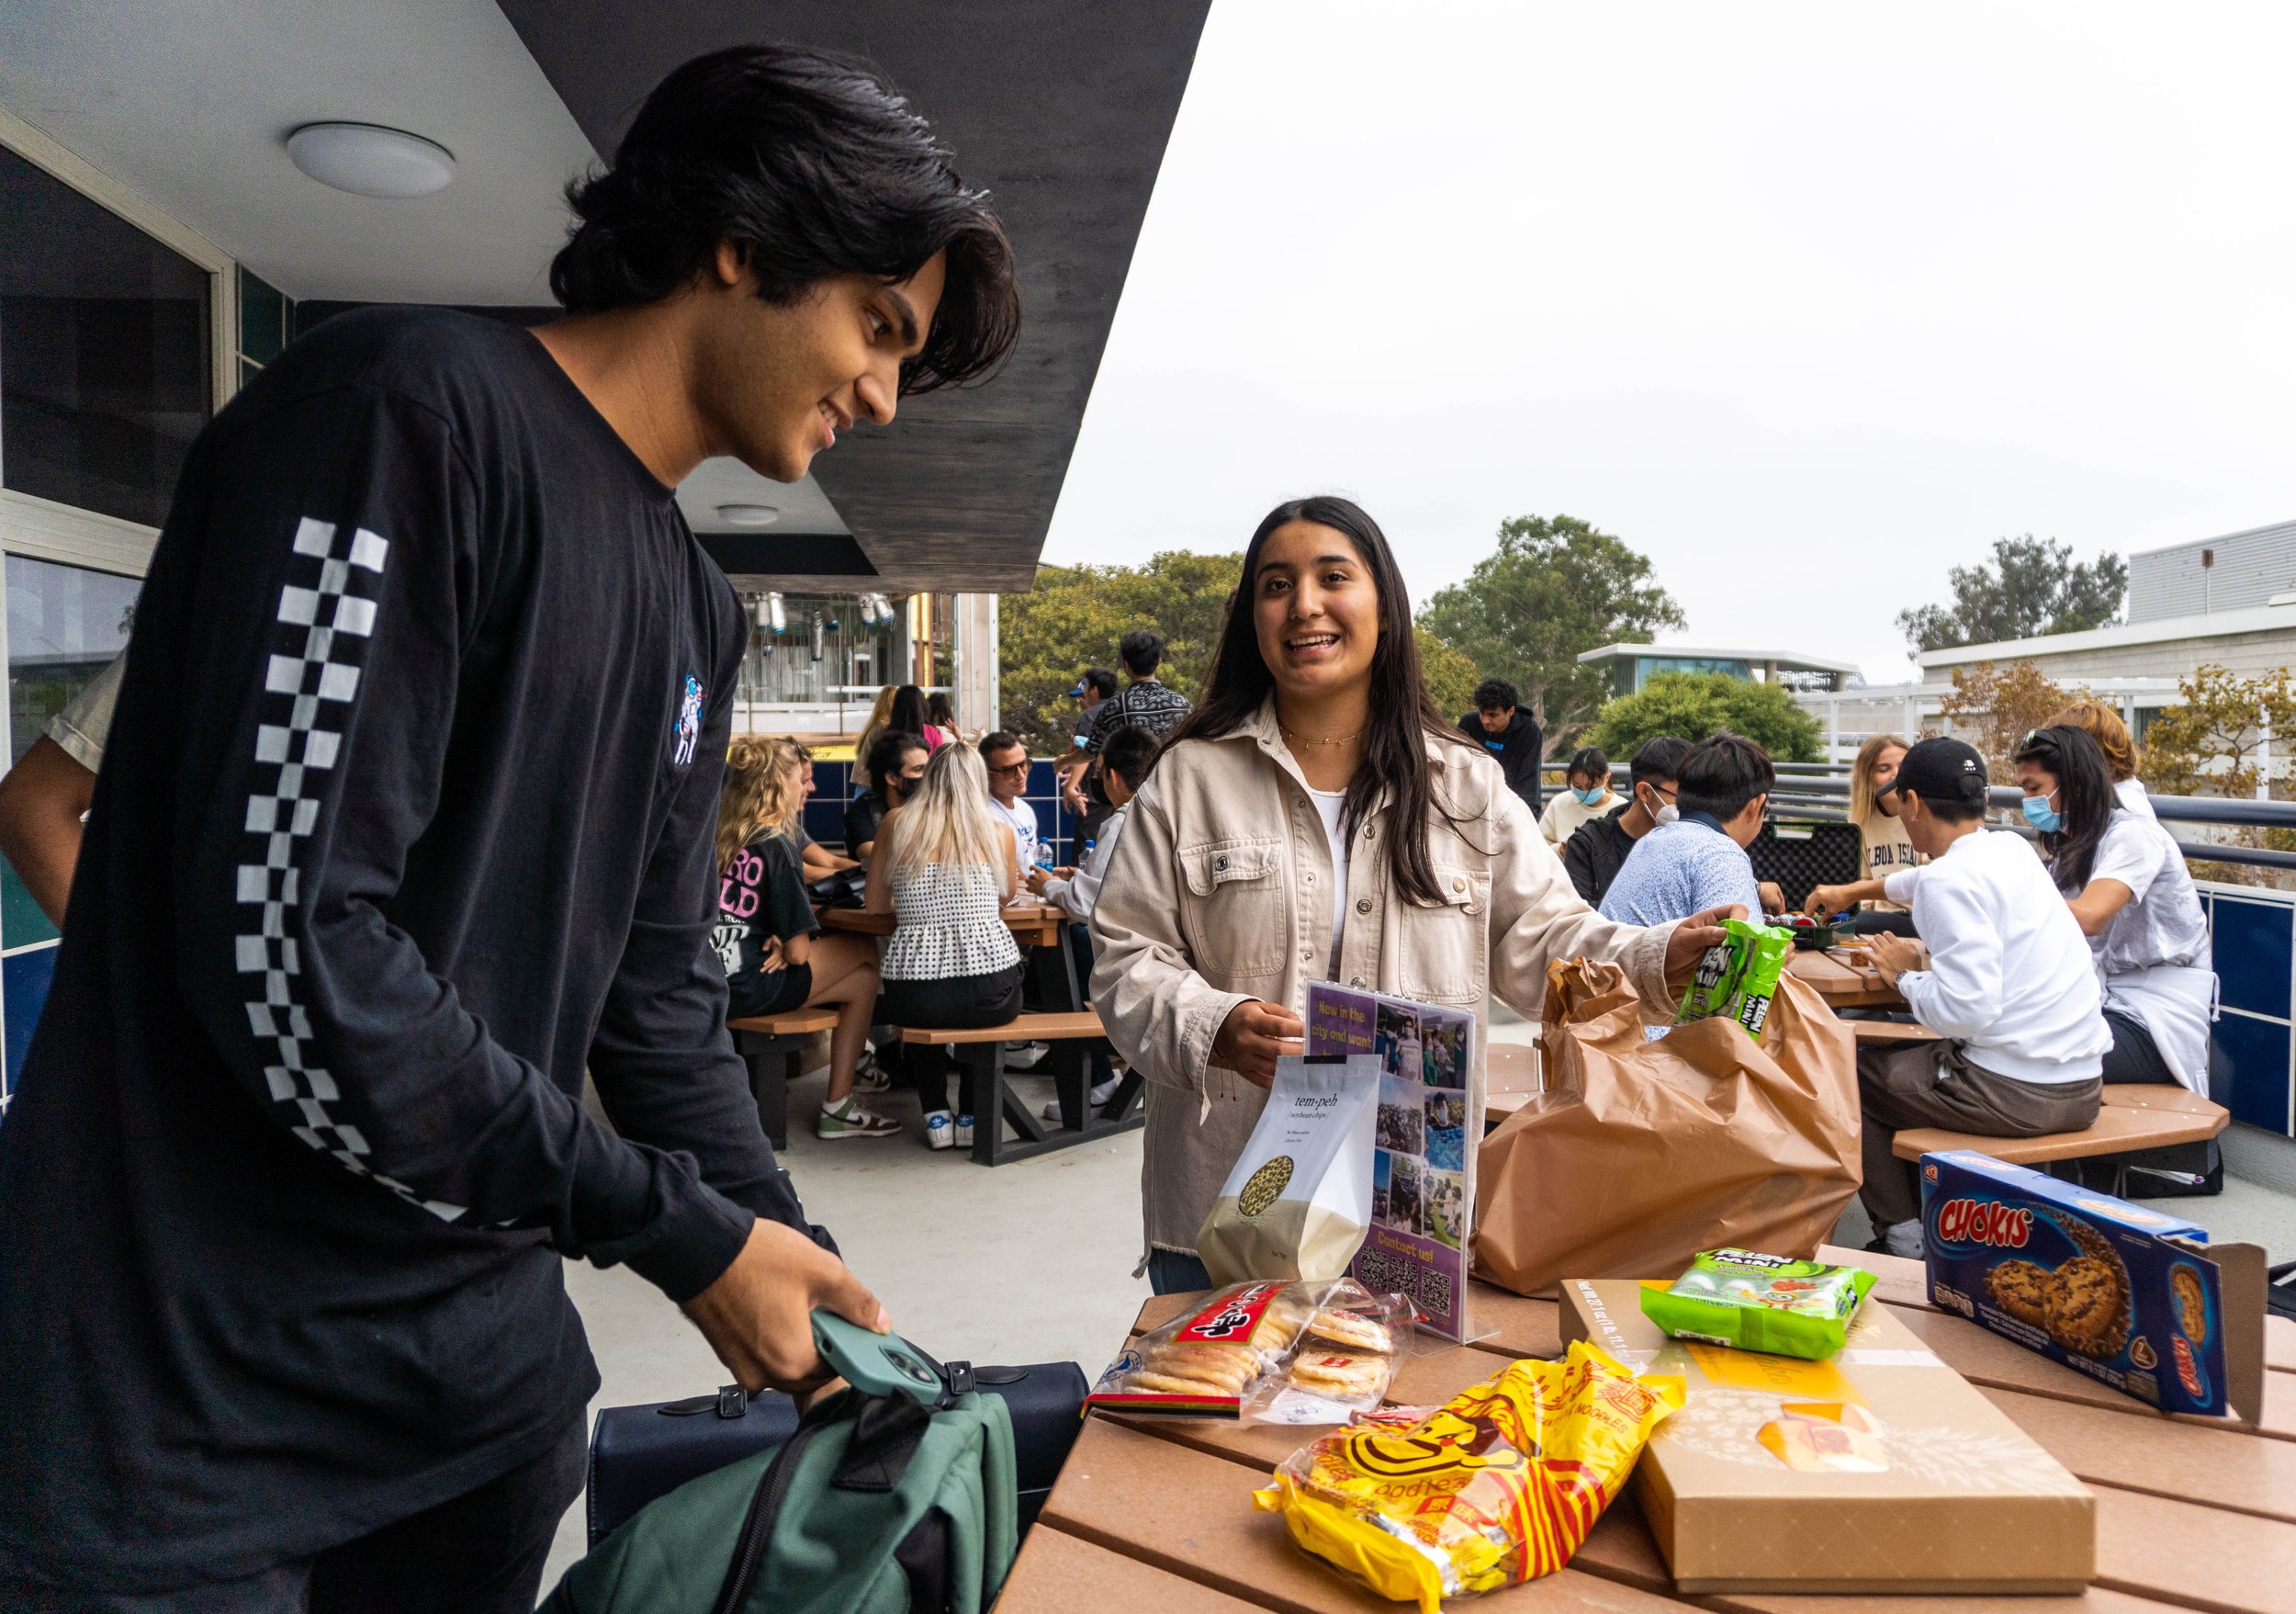  (L-R) Sharar Chowdhury, Club Delegate, and Abril Olivares Nolasco, President of the Santa Monica College International Student Forum (ISF) lay out the snacks their club members brought from their hometowns during the ISF's Snacks Appreciation Day on